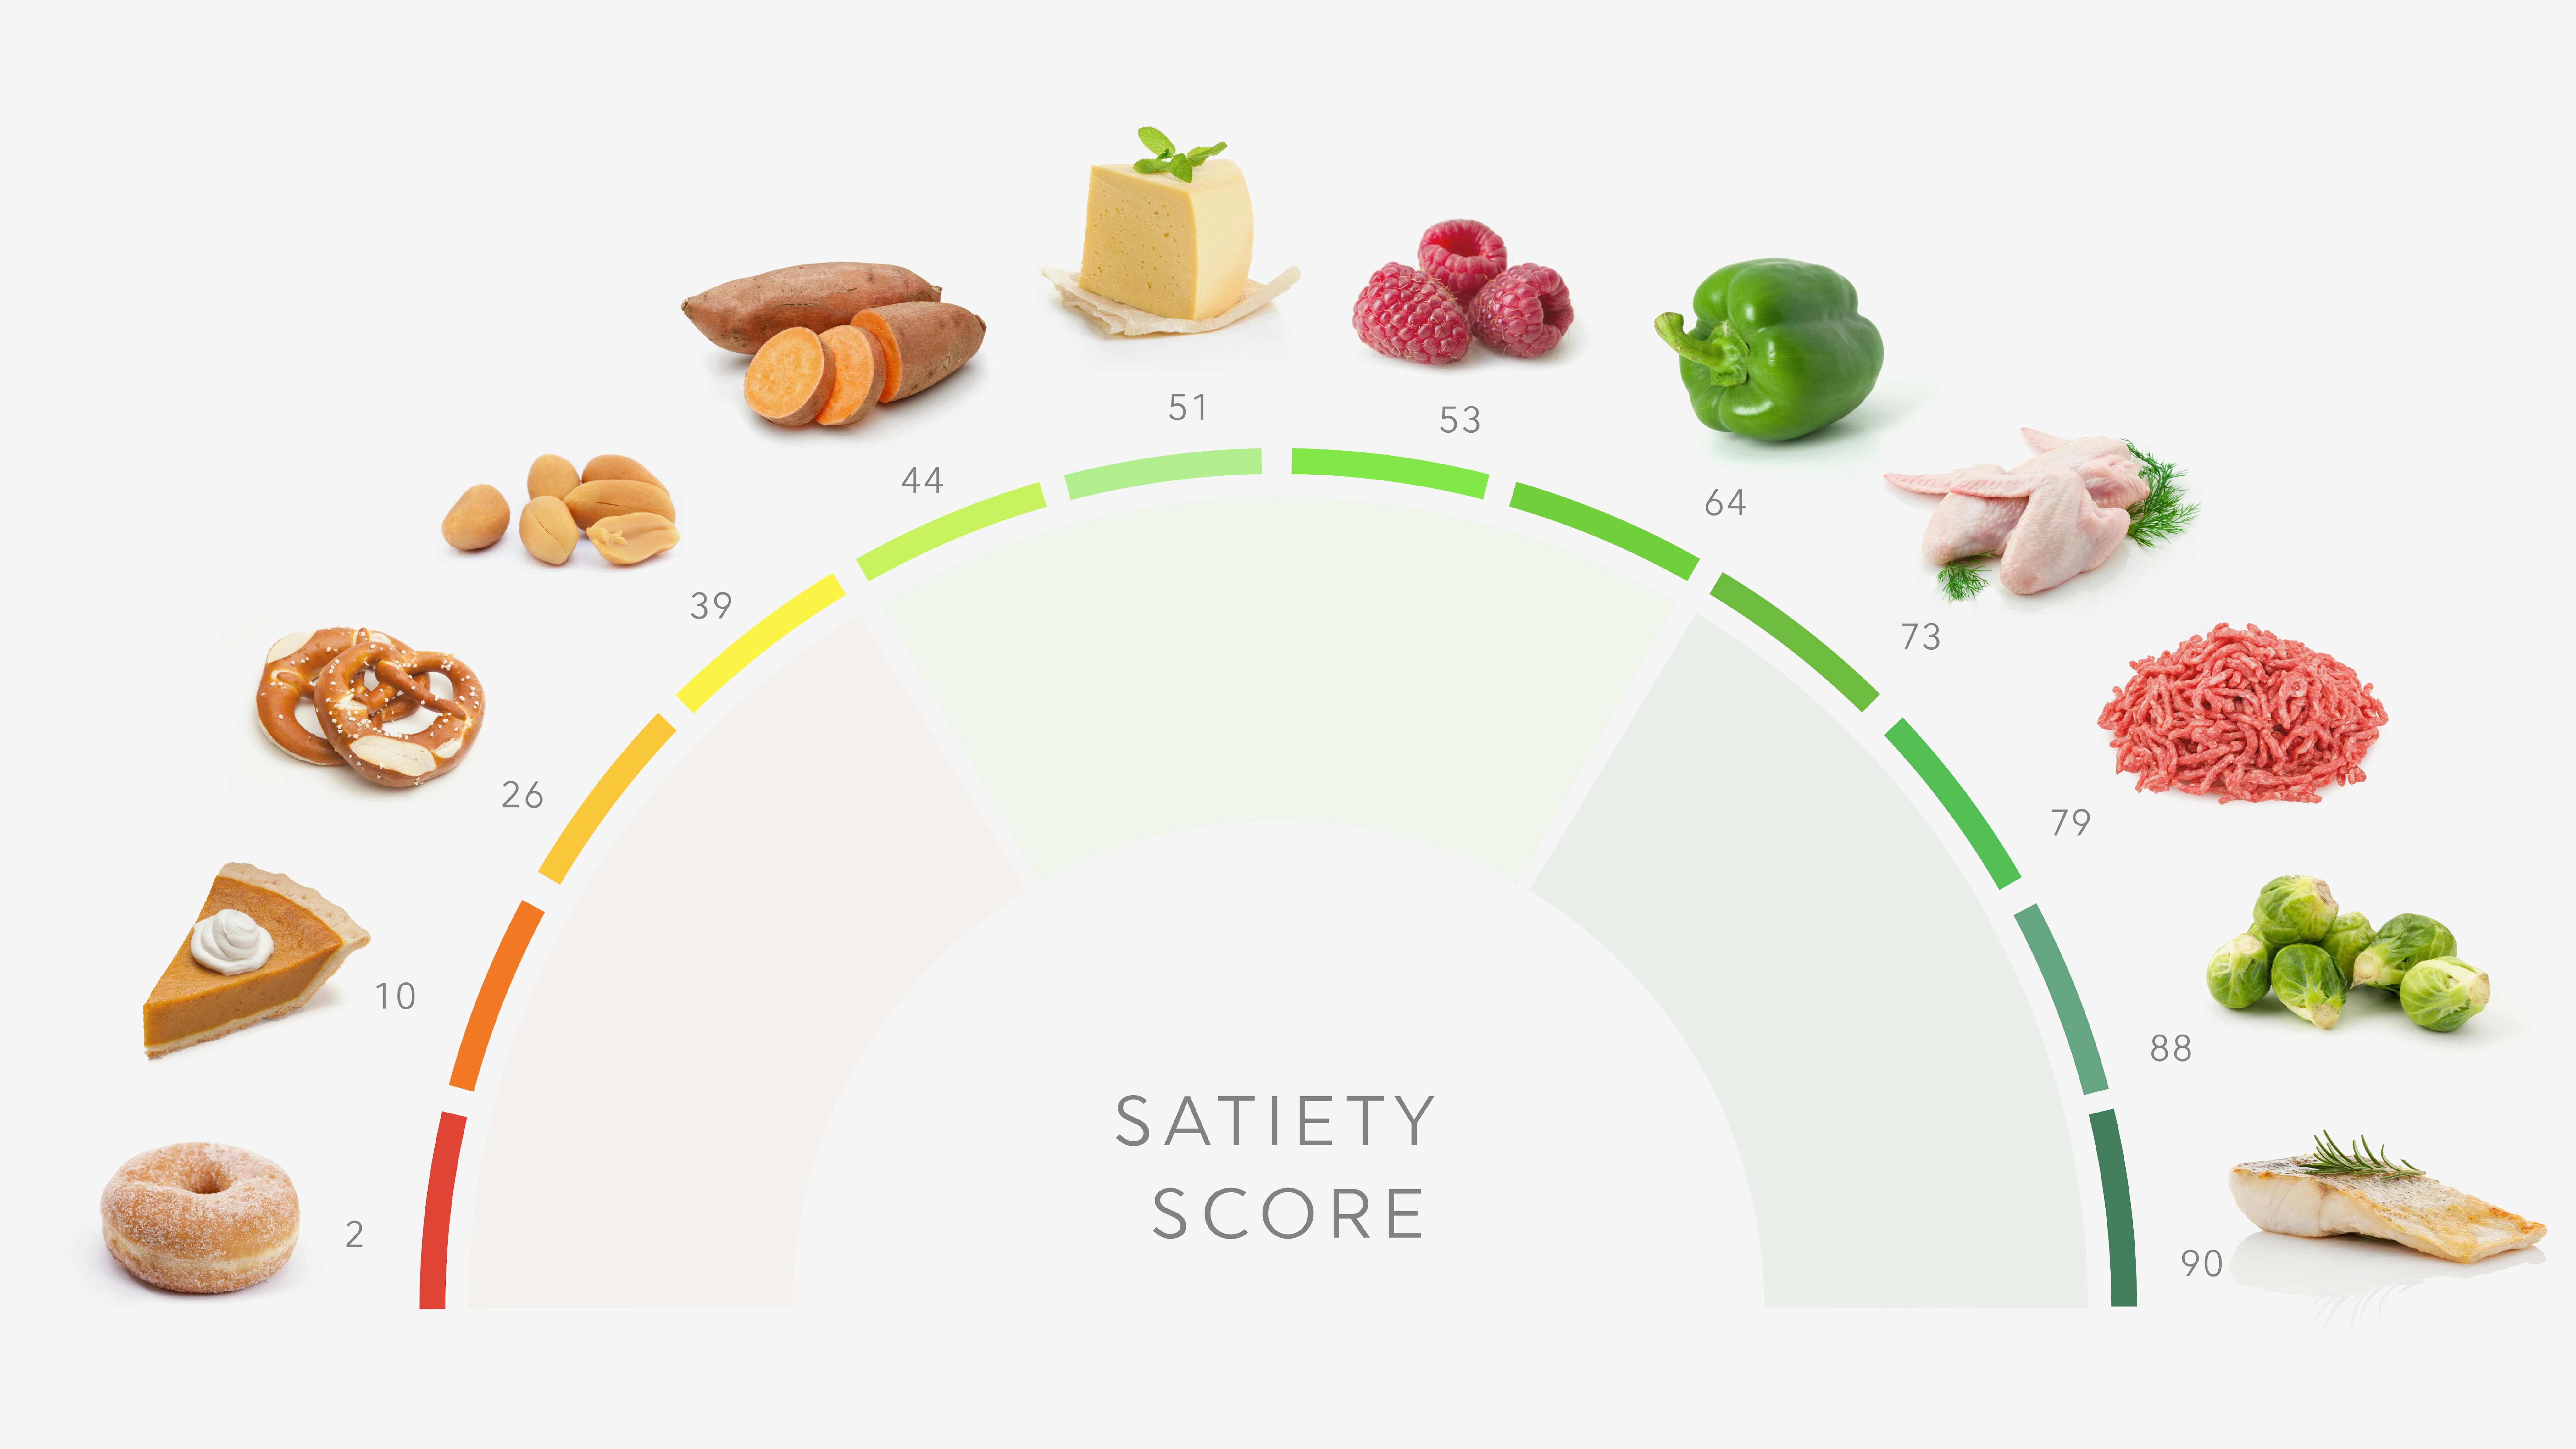 Satiety and weight loss